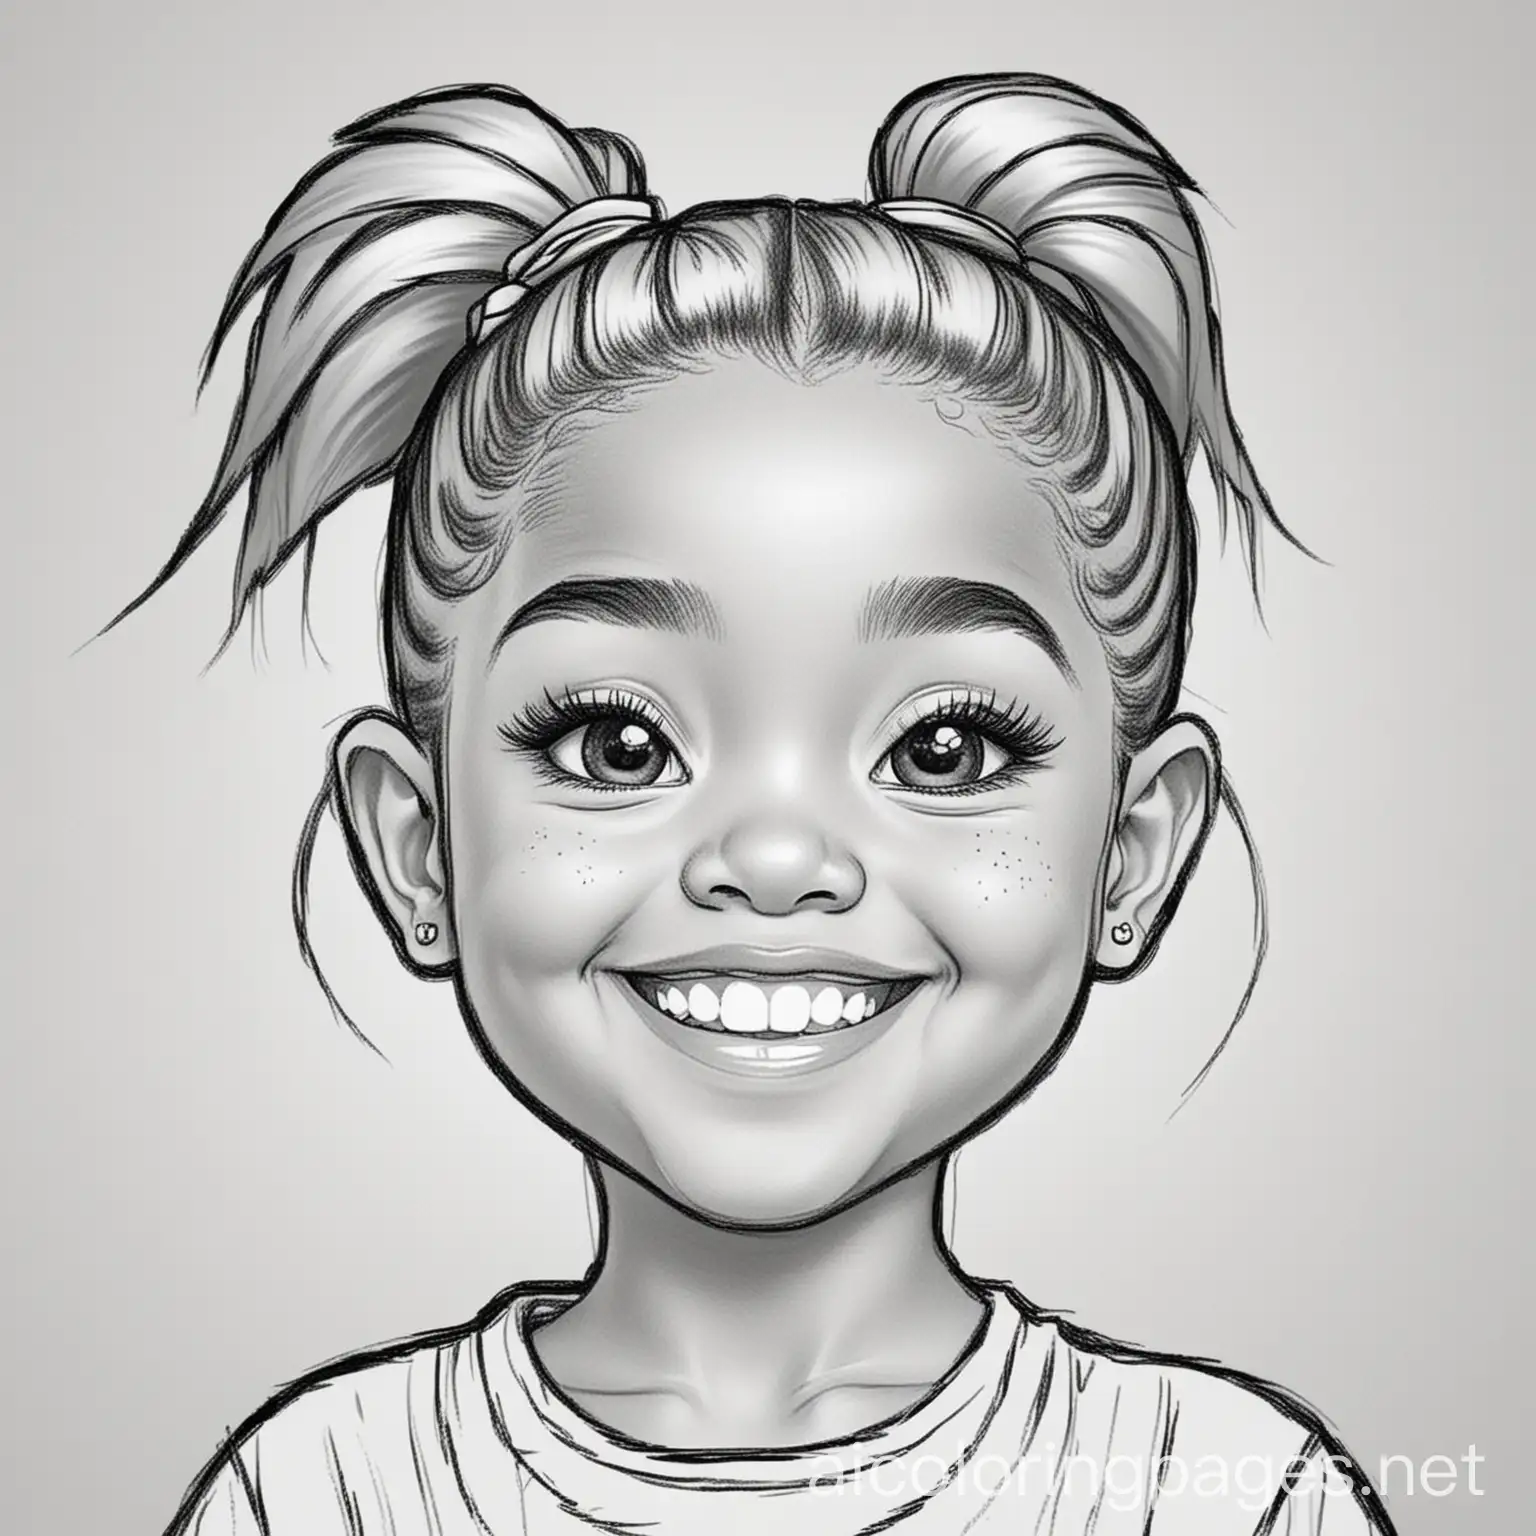 l5 year old black girl with ponytail and happy face, Coloring Page, black and white, line art, white background, Simplicity, Ample White Space. The background of the coloring page is plain white to make it easy for young children to color within the lines. The outlines of all the subjects are easy to distinguish, making it simple for kids to color without too much difficulty